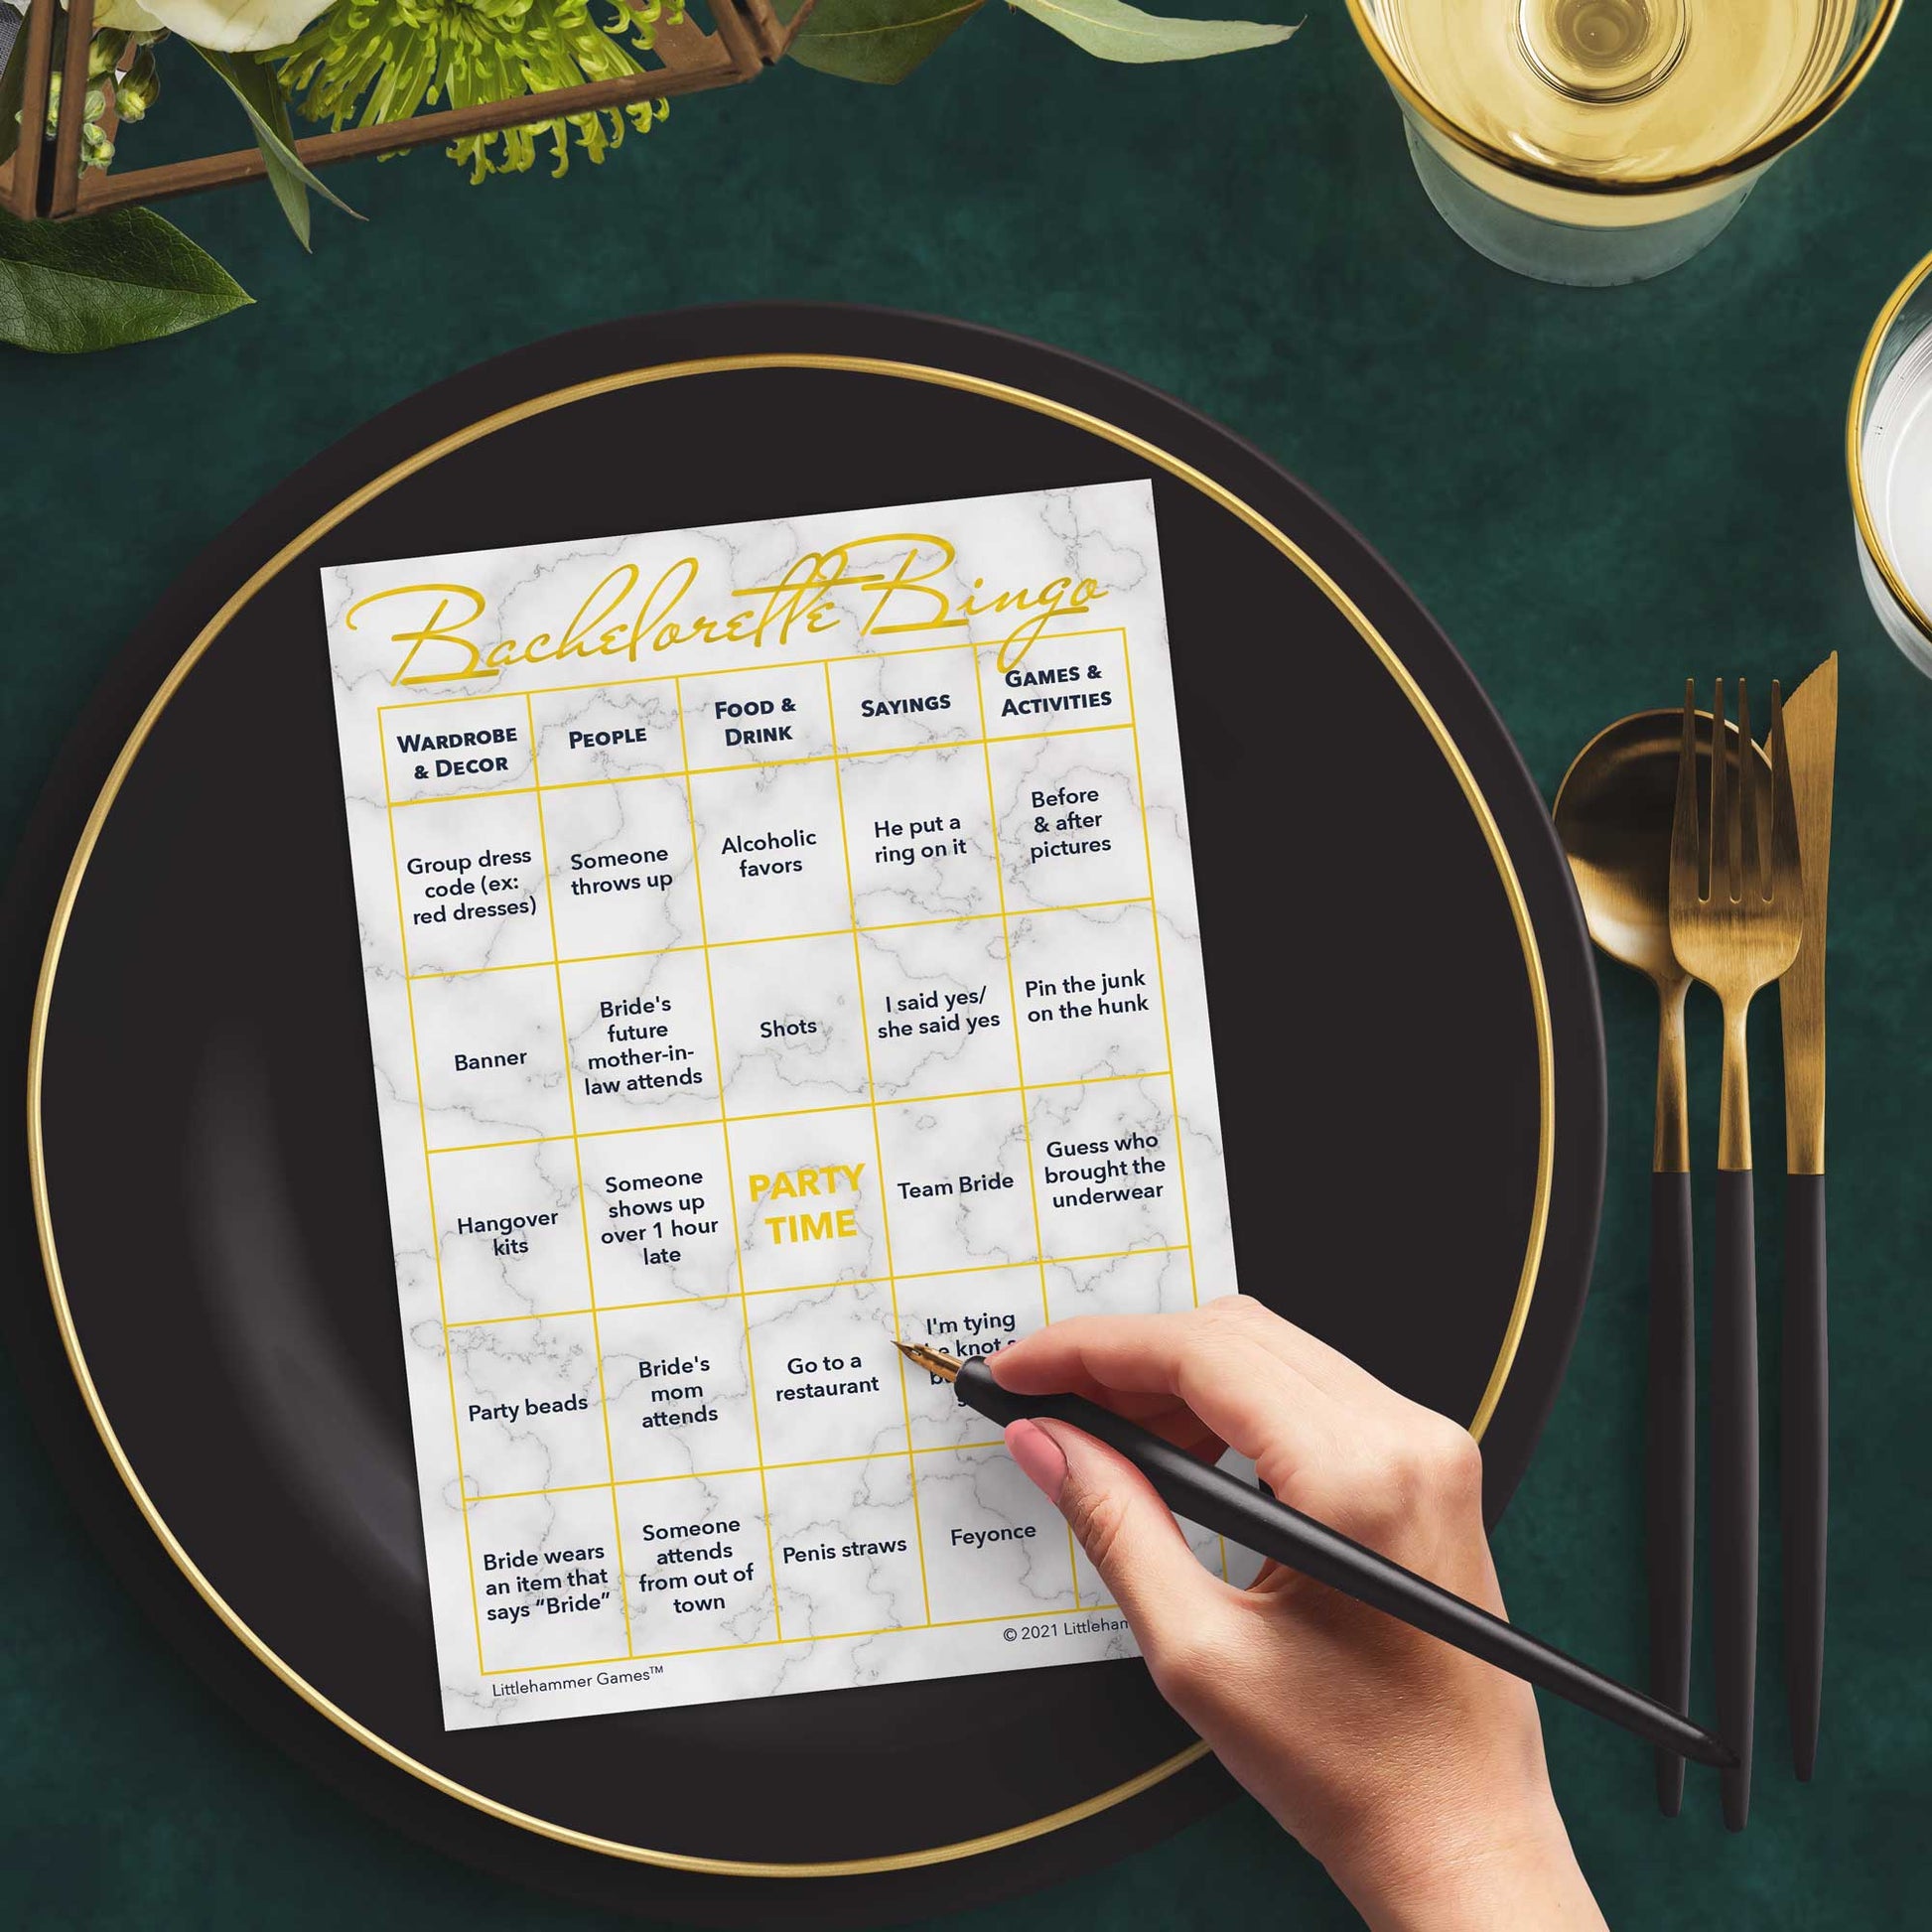 Woman with a pen sitting at a table with a gold and marble Bachelorette Bingo game card on a gold and black plate on a dark place setting